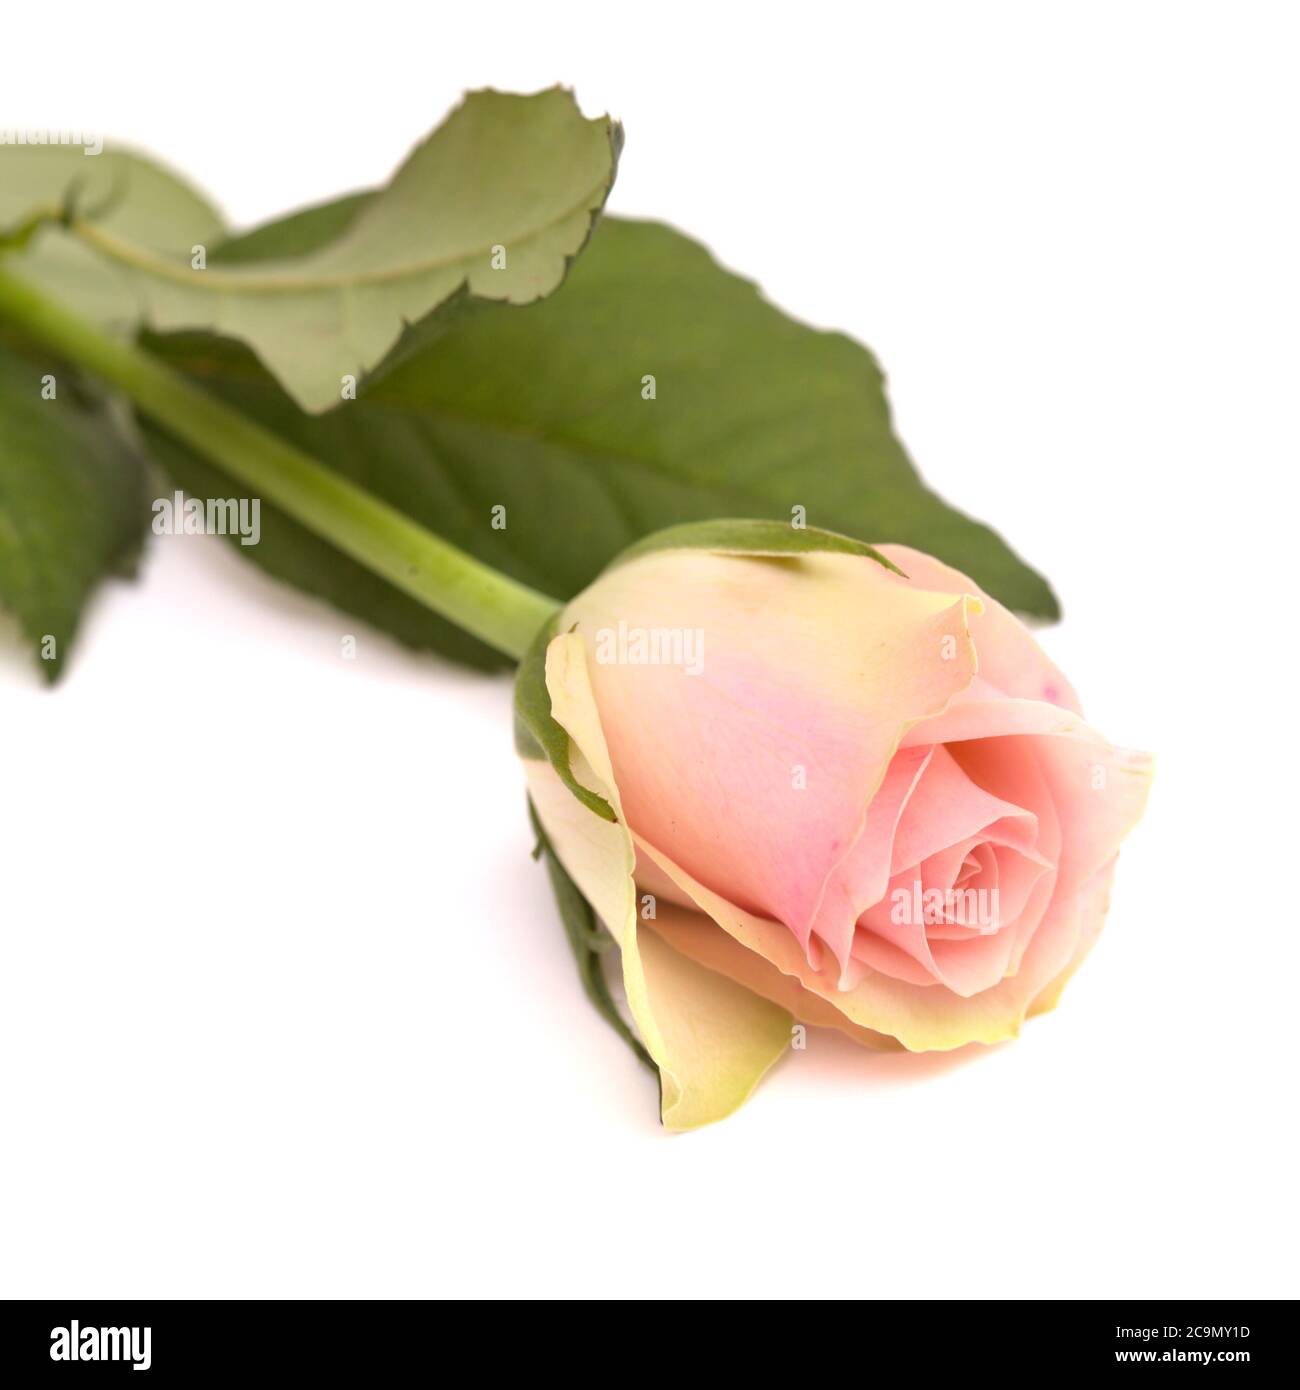 Unusual rose with green outer petals and pink, center isolated on white Stock Photo